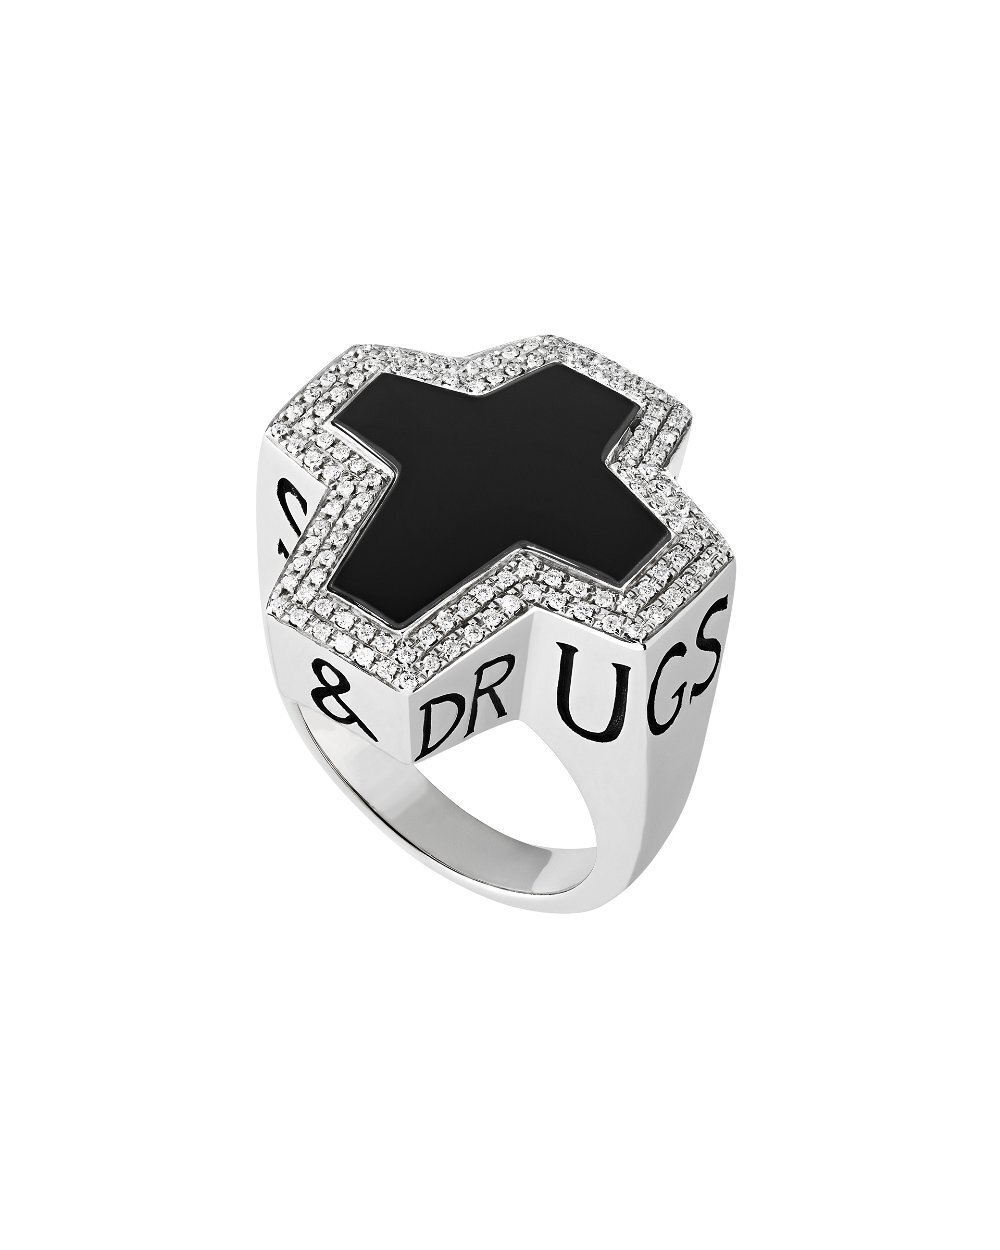 Thorn Sex Drugs & Rock "N" Roll Ring with Black Onyx and White Diamonds in Sterling Silver - Size 11